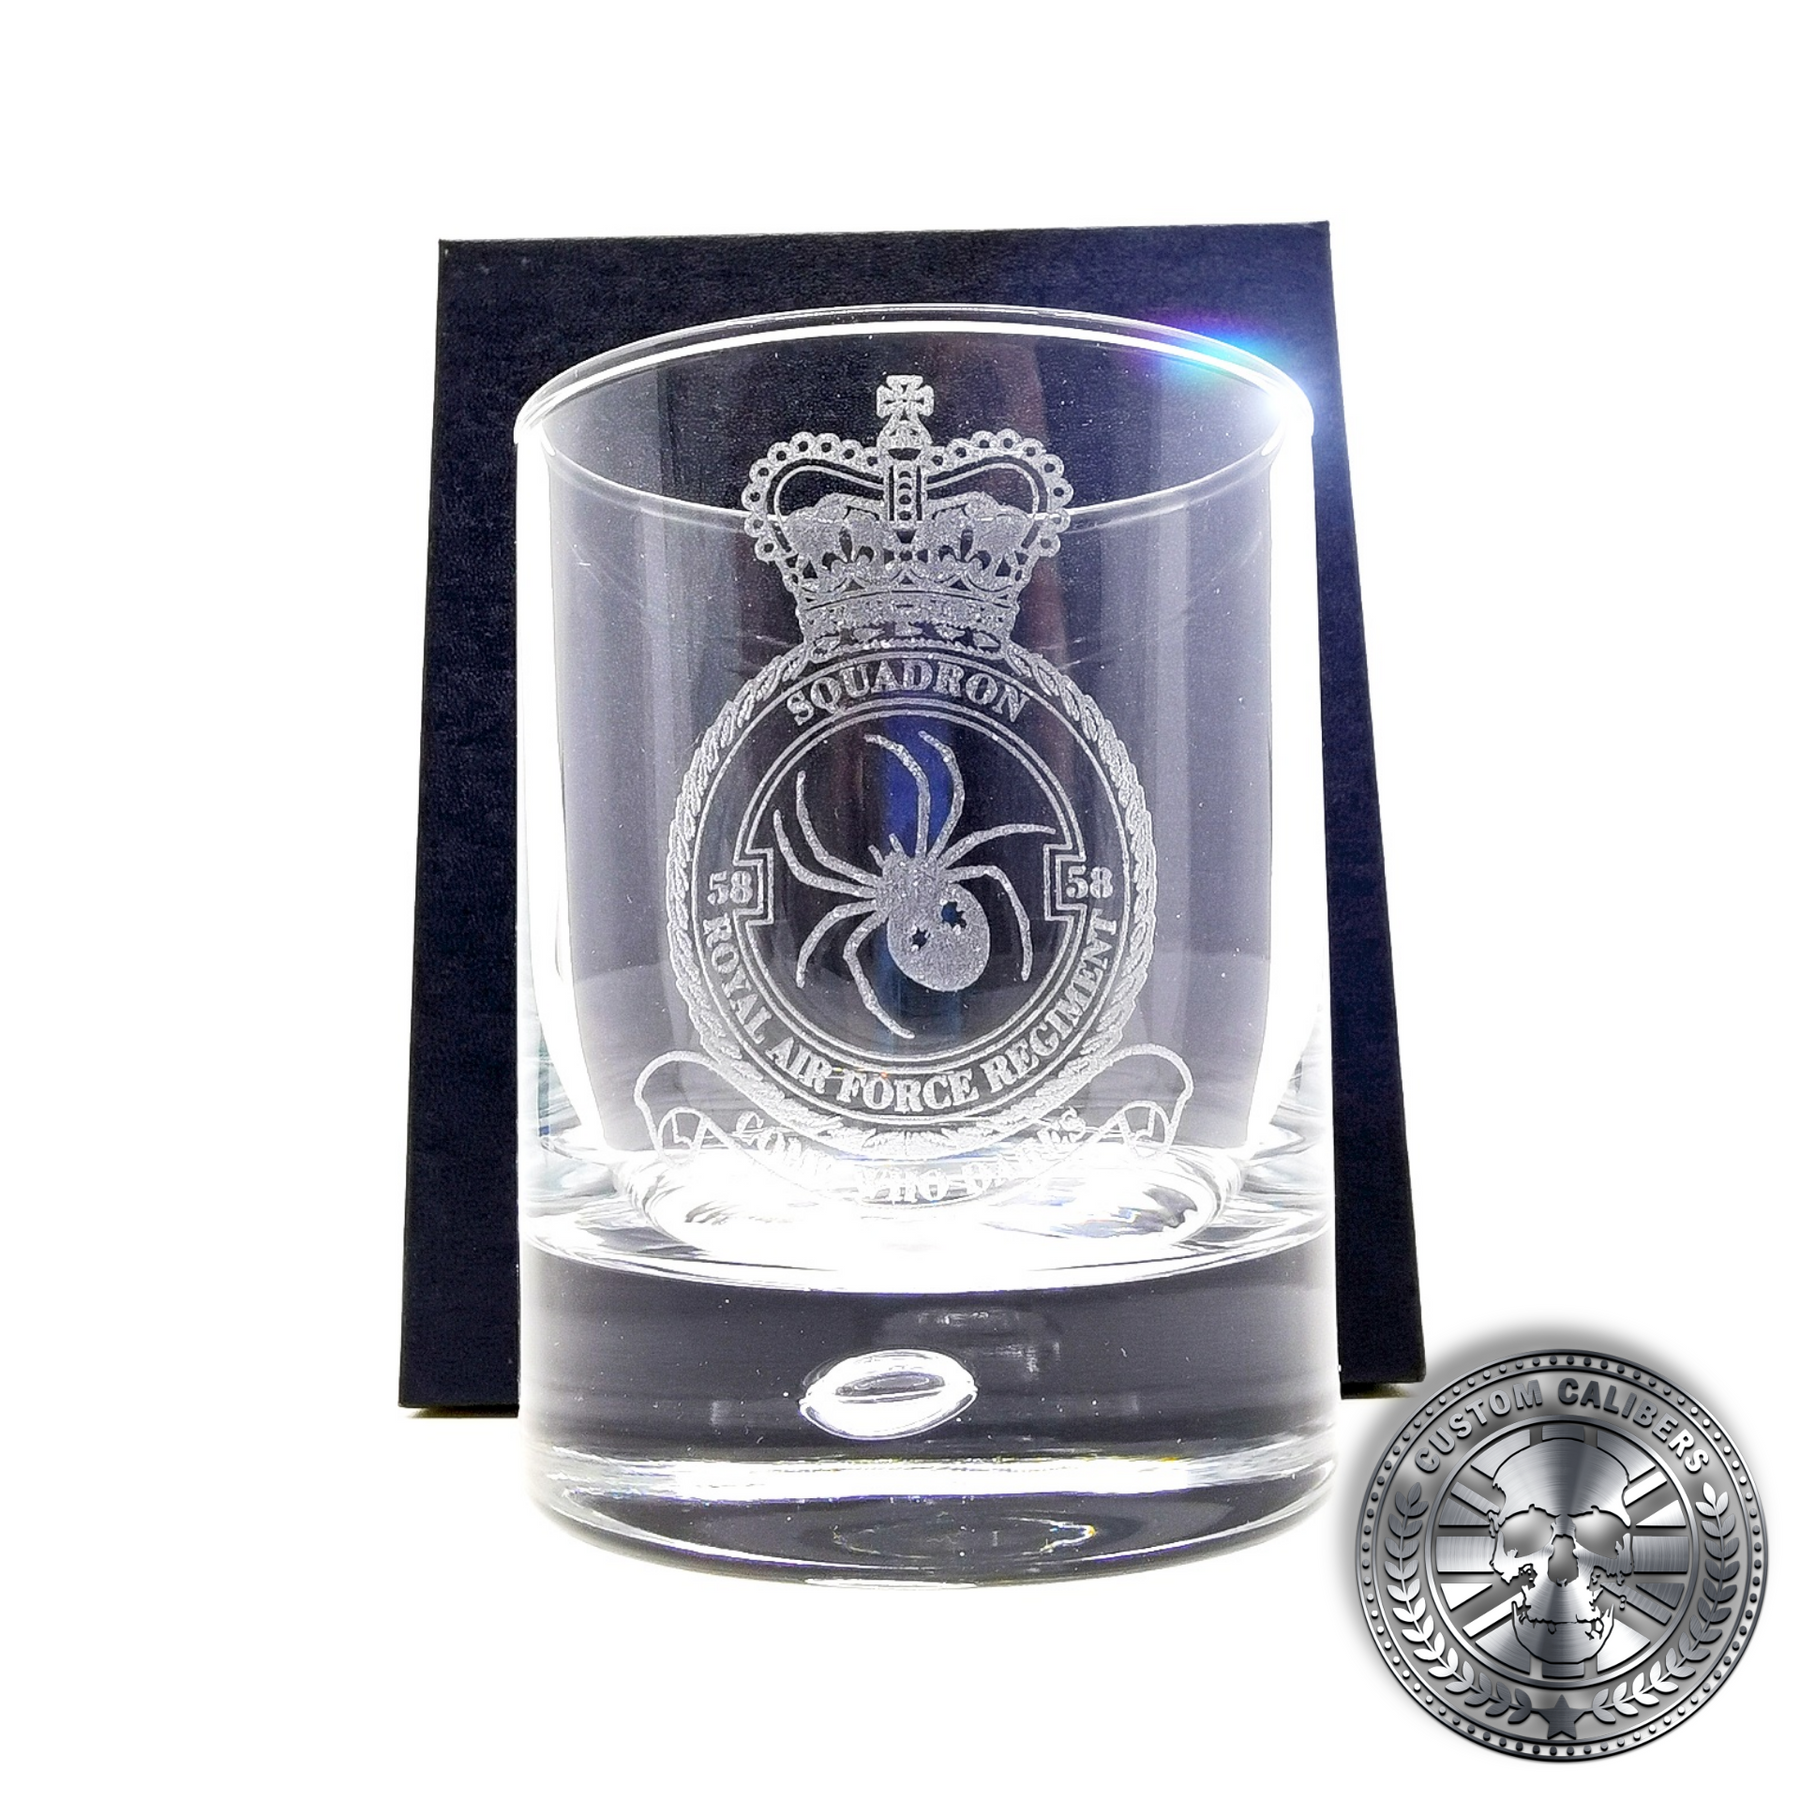 another laser etched whisky tumbler inside a silk lined gift box